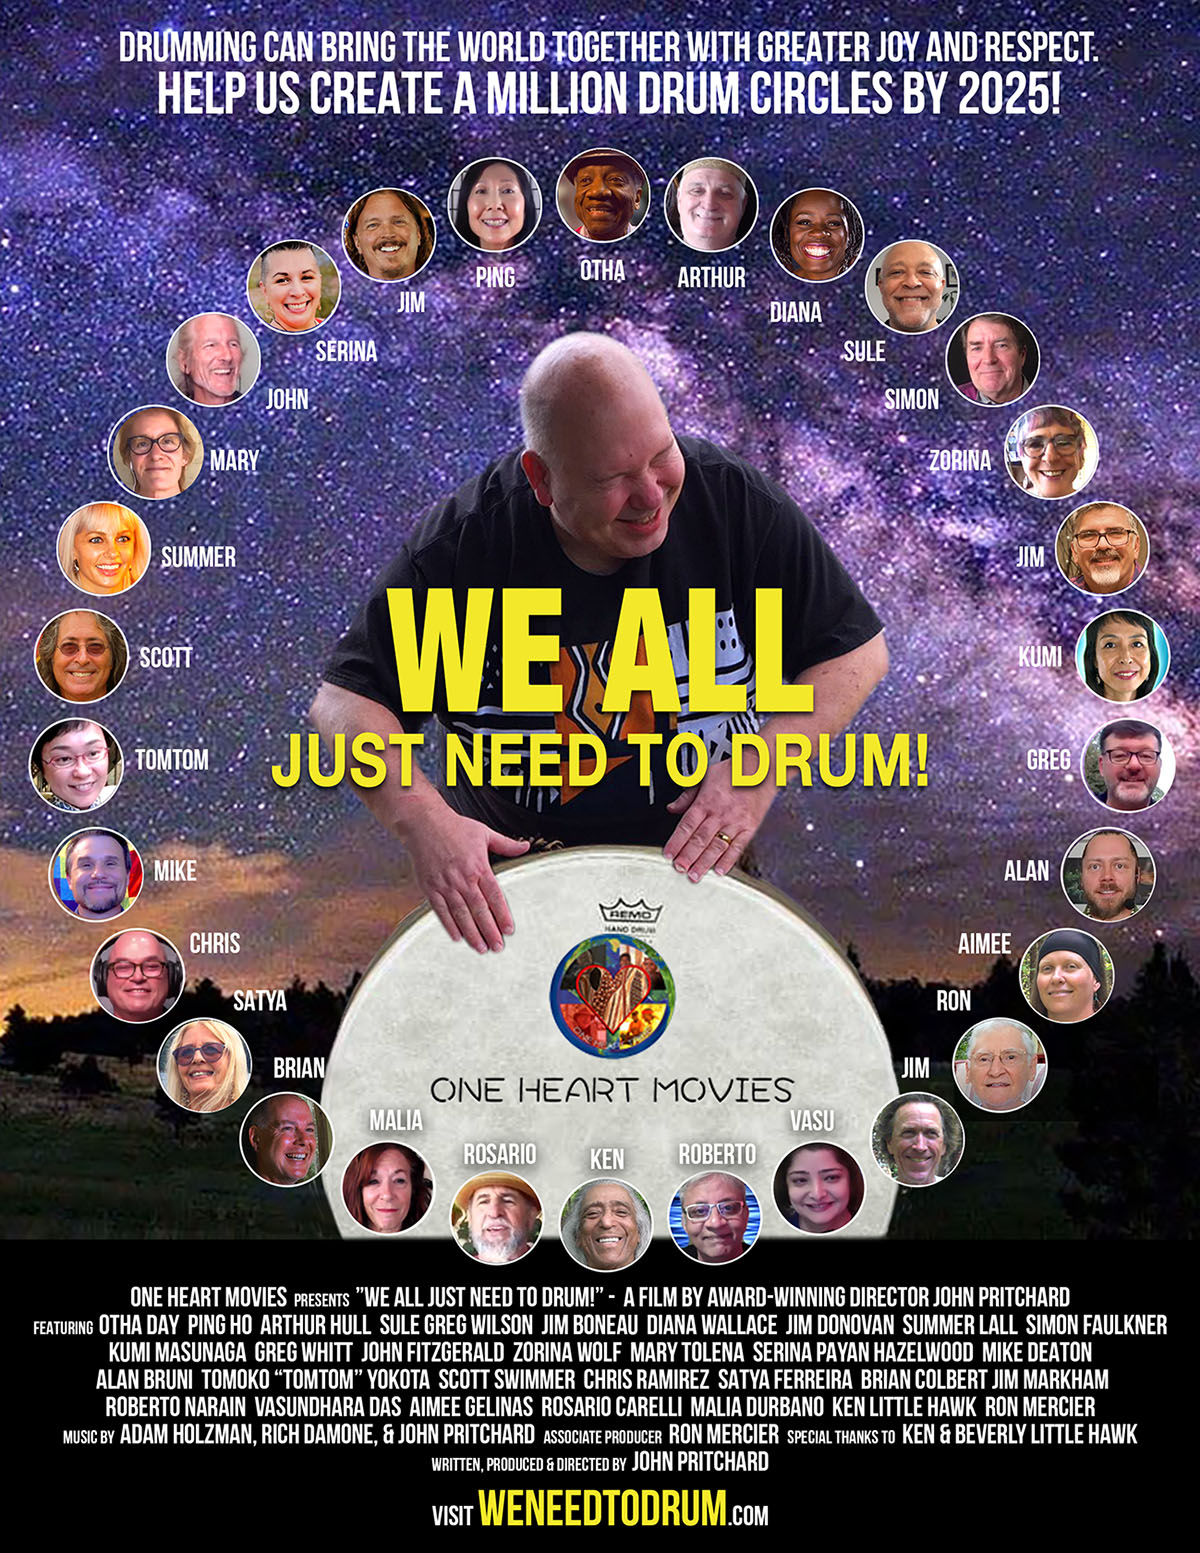 WE ALL JUST NEED TO DRUM!